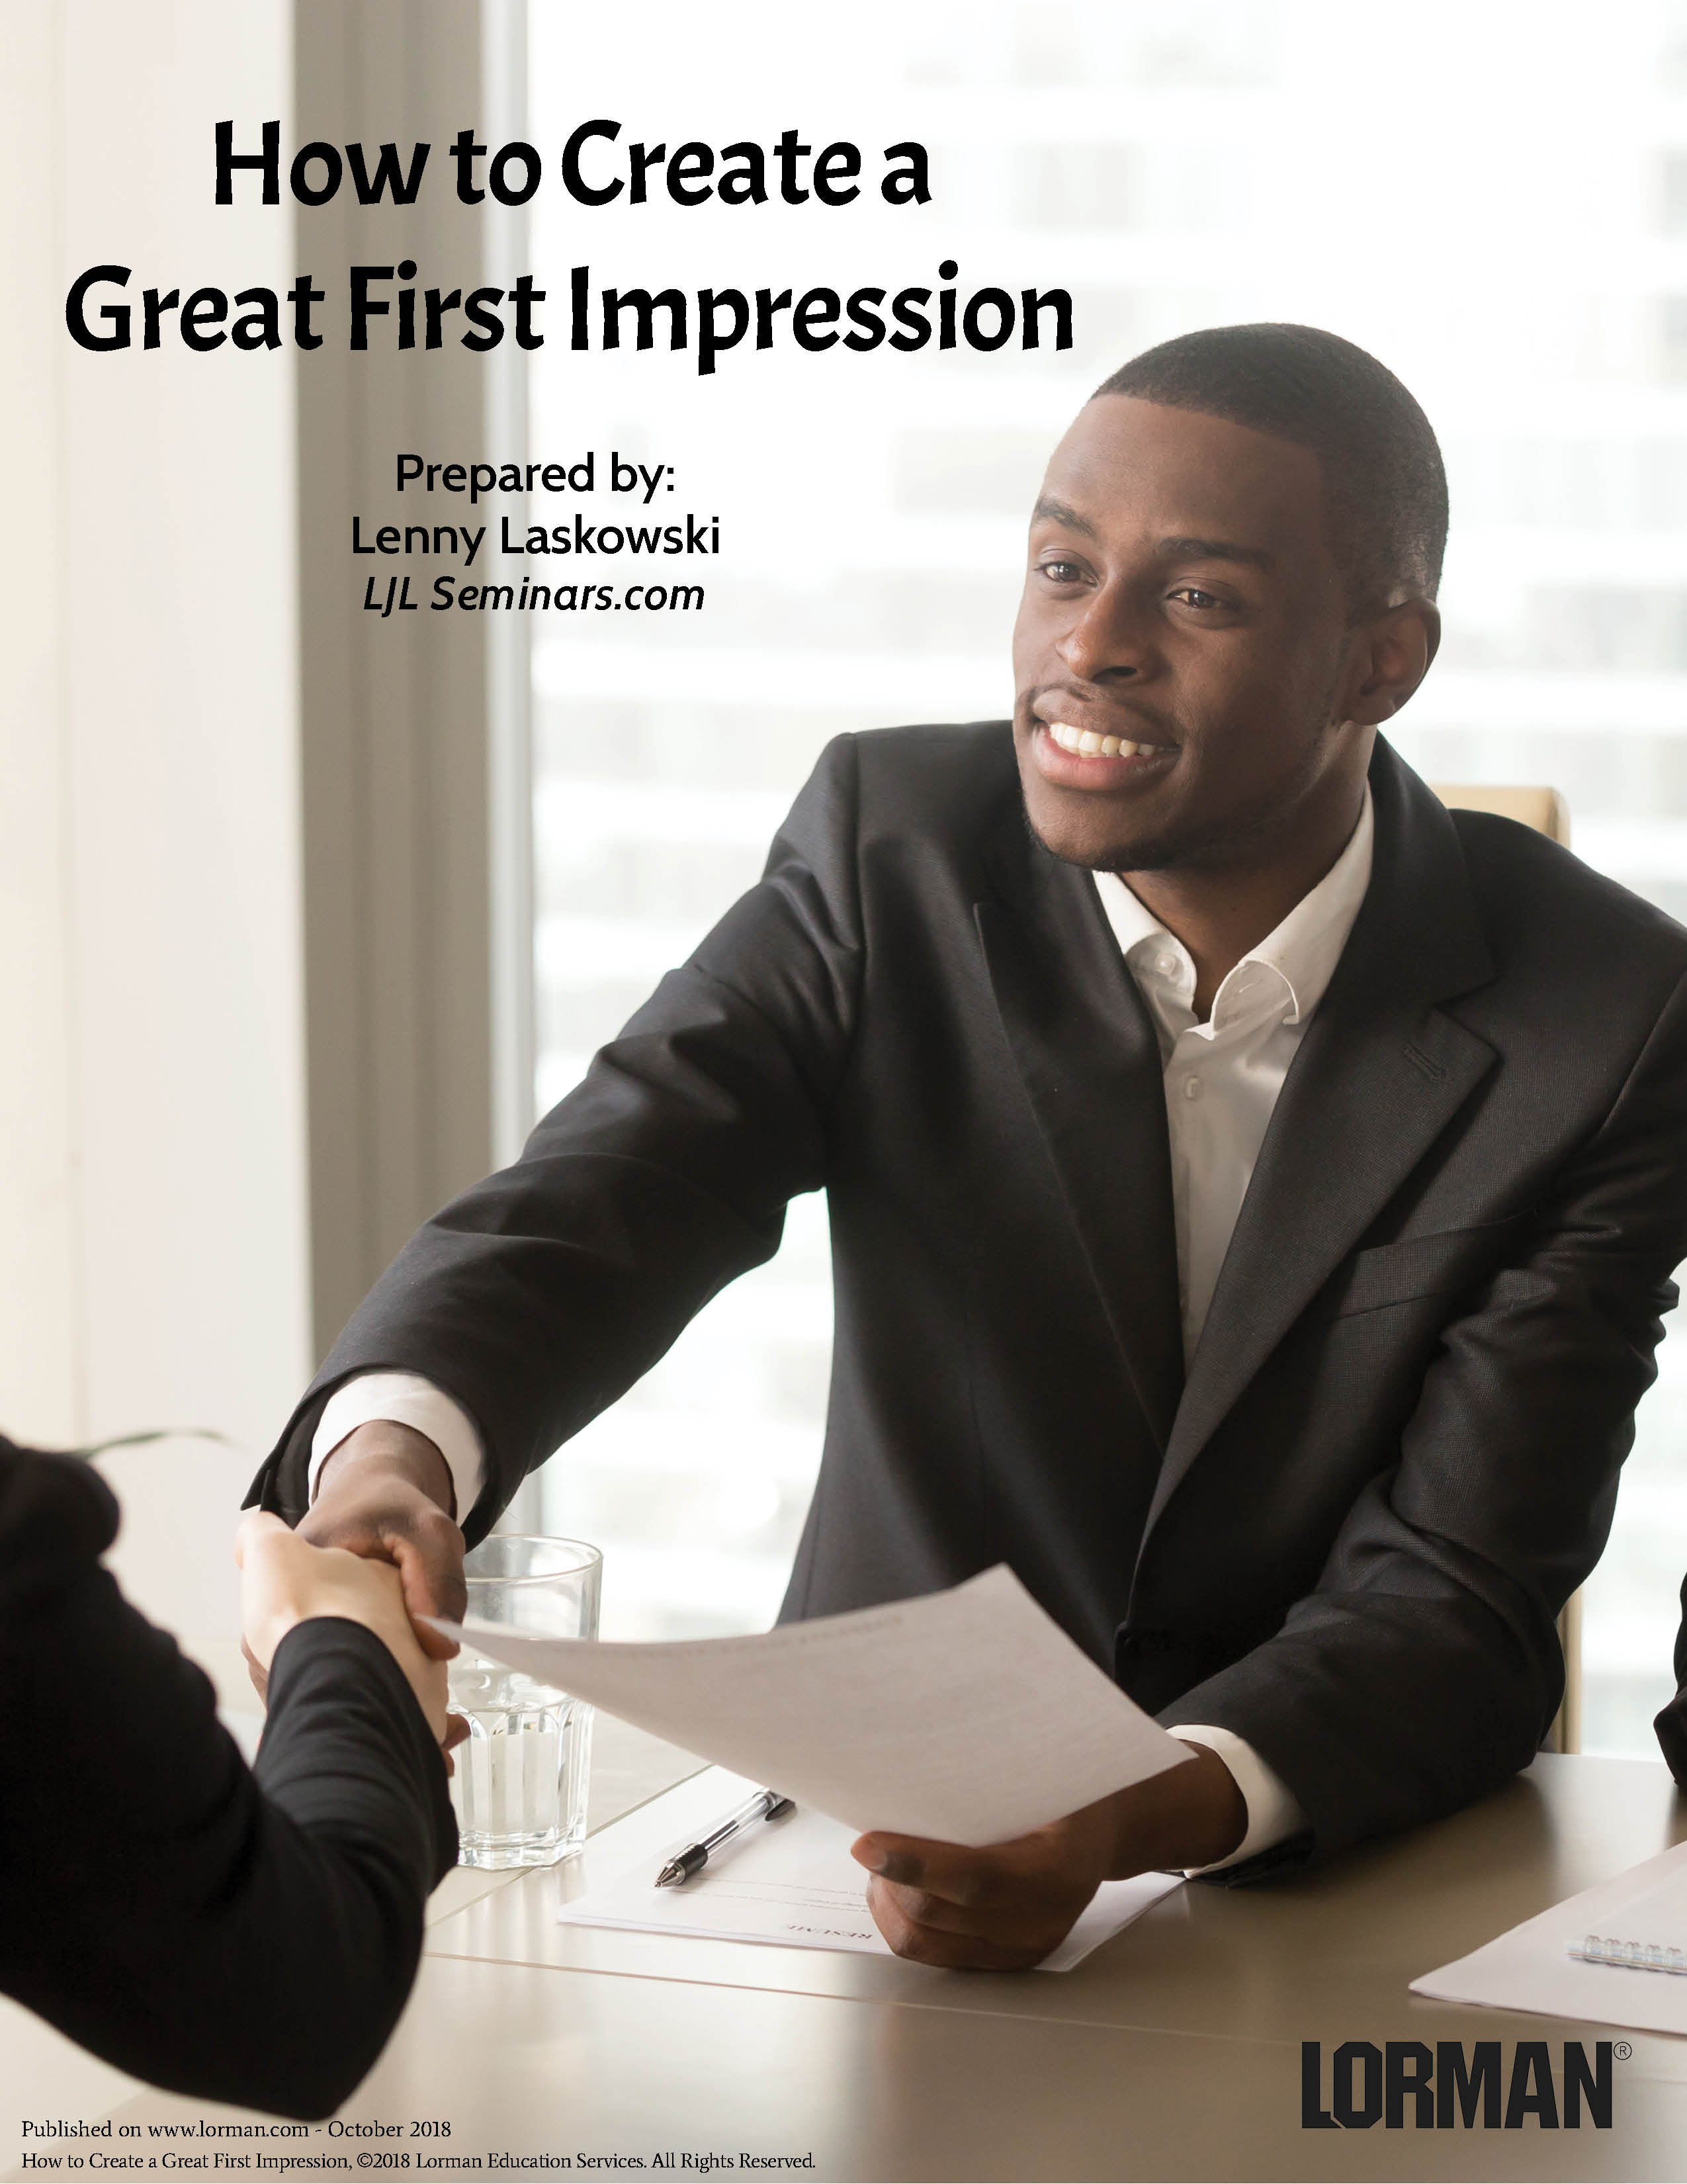 How to Create a Great First Impression